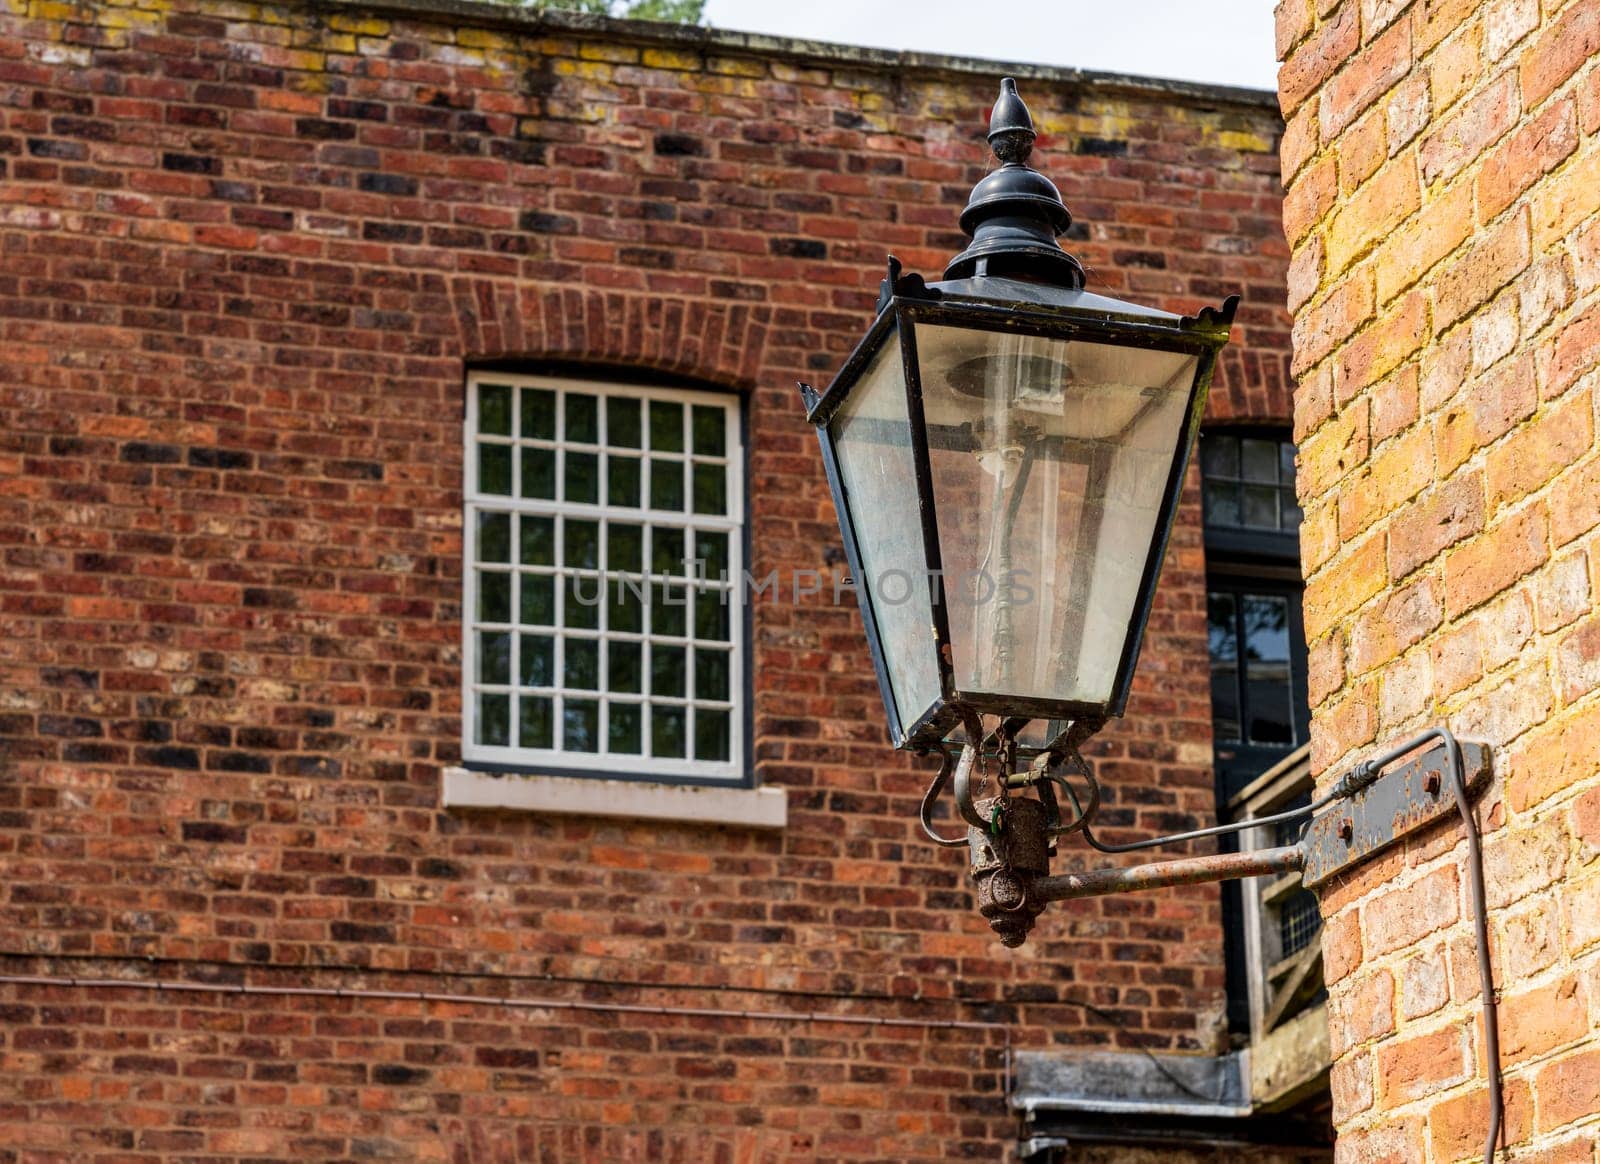 Restored industrial cotton mill with old gas light by steheap